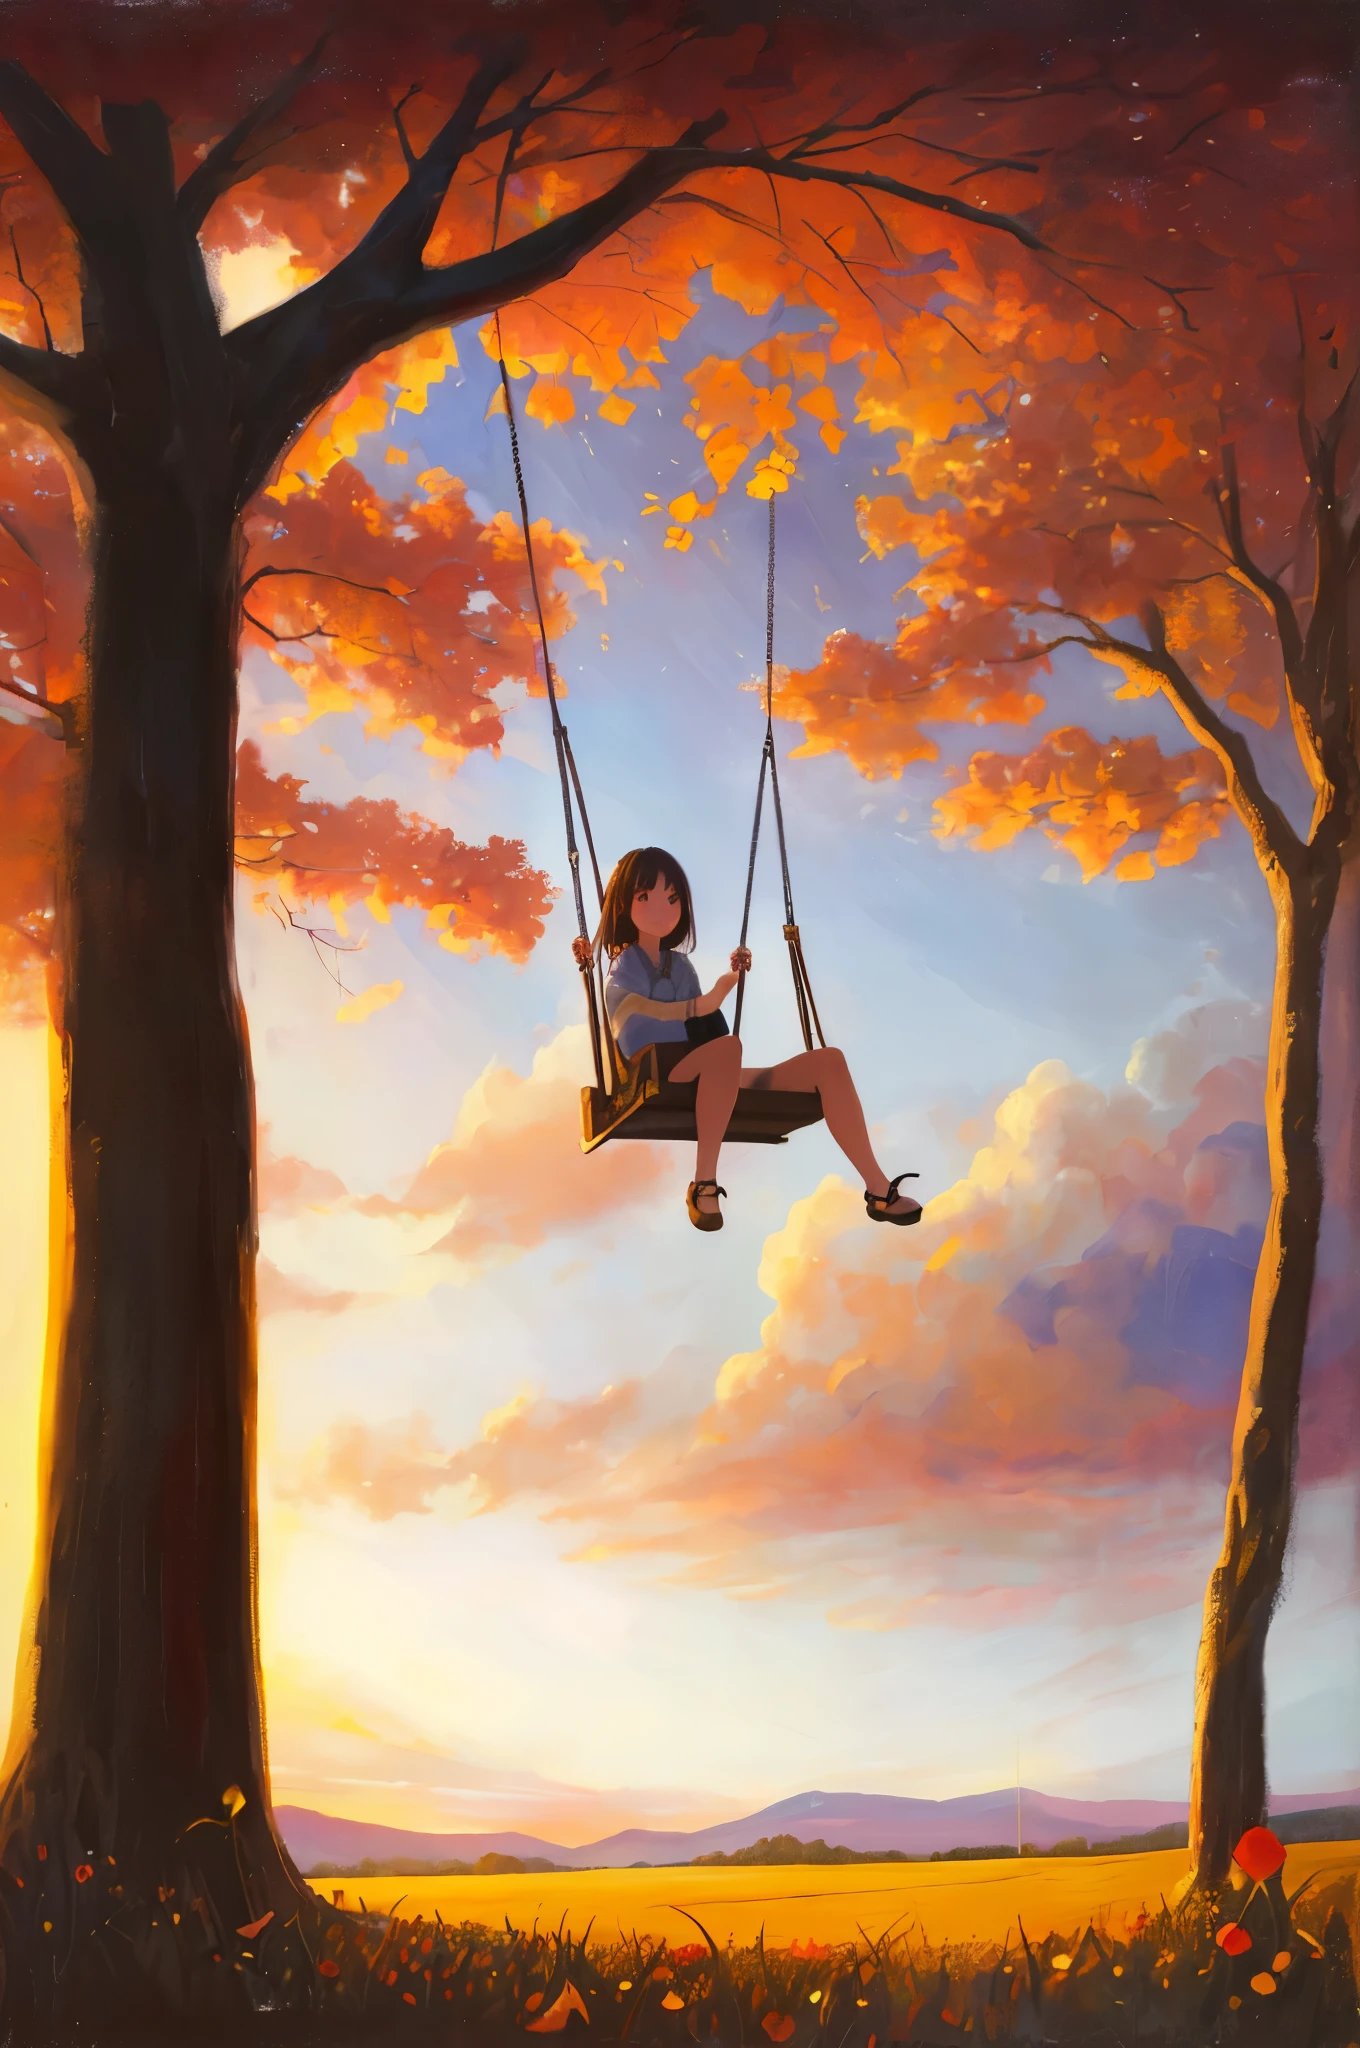 painting of a swing, hanging from a tree in a field, tree swing, Calm and content painting, swing, emotional oil painting, Dreamy scene, magical realism painting, It's not going anywhere. oil painting, fantasy oil on canvas, Atmospheric picture of a fairytale landscape, surreal oil painting, Kim Doo Ryang, breathtaking art, Painting of romanticism, surreal painting, Girl on a swing, Sitting on a swing, (((Warm shades)))